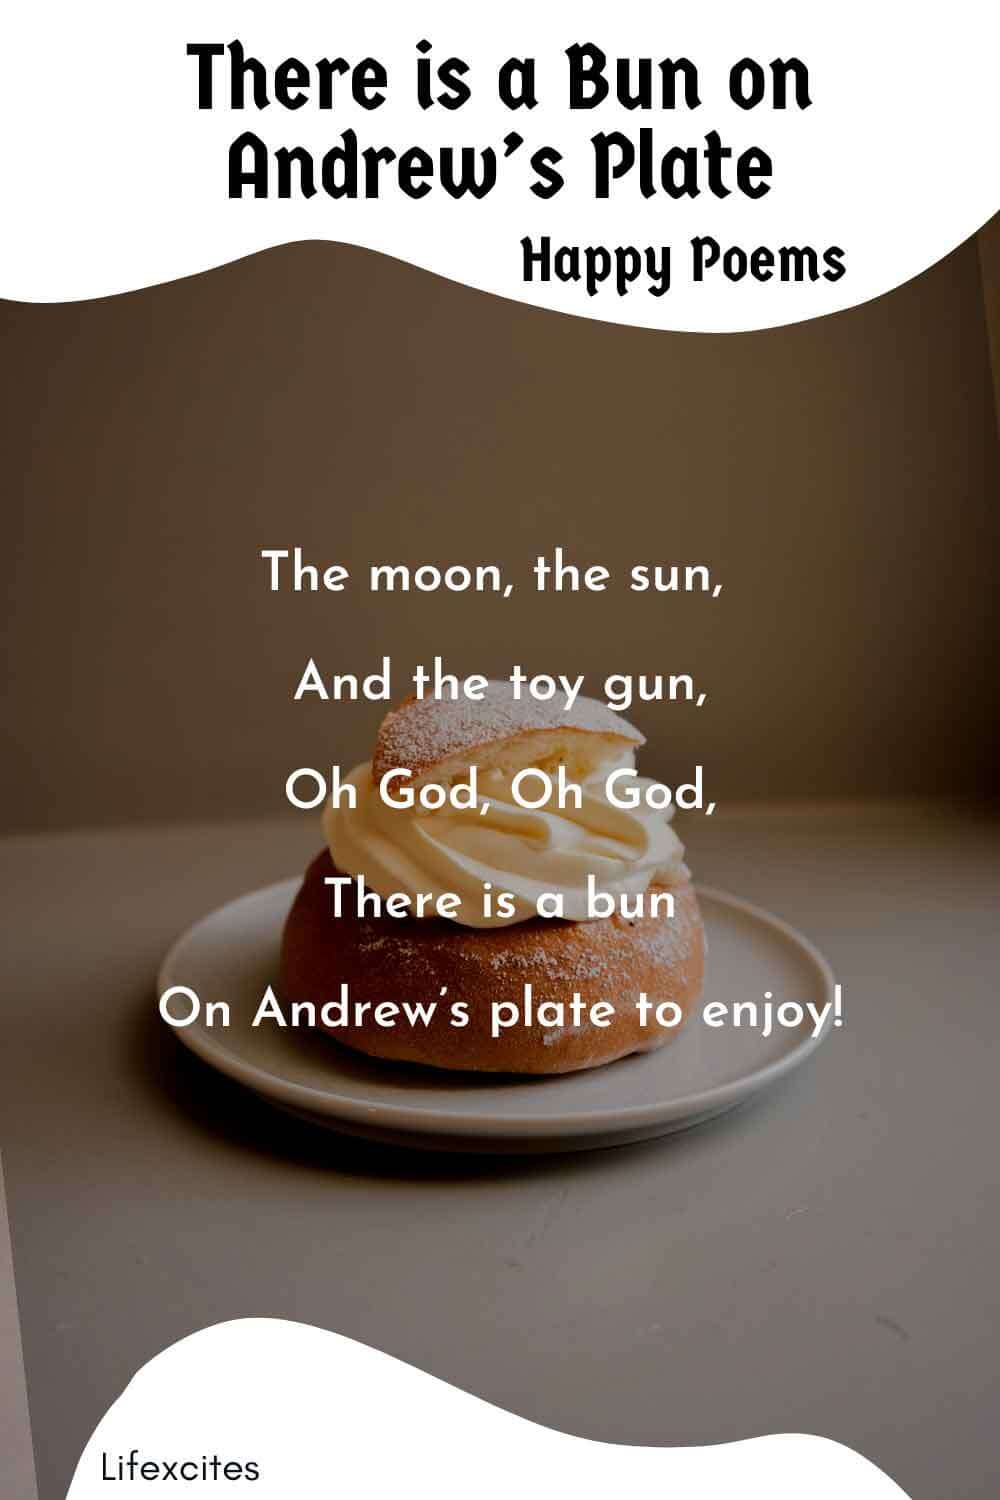 There is a Bun on Andrew’s Plate – Happy Poems